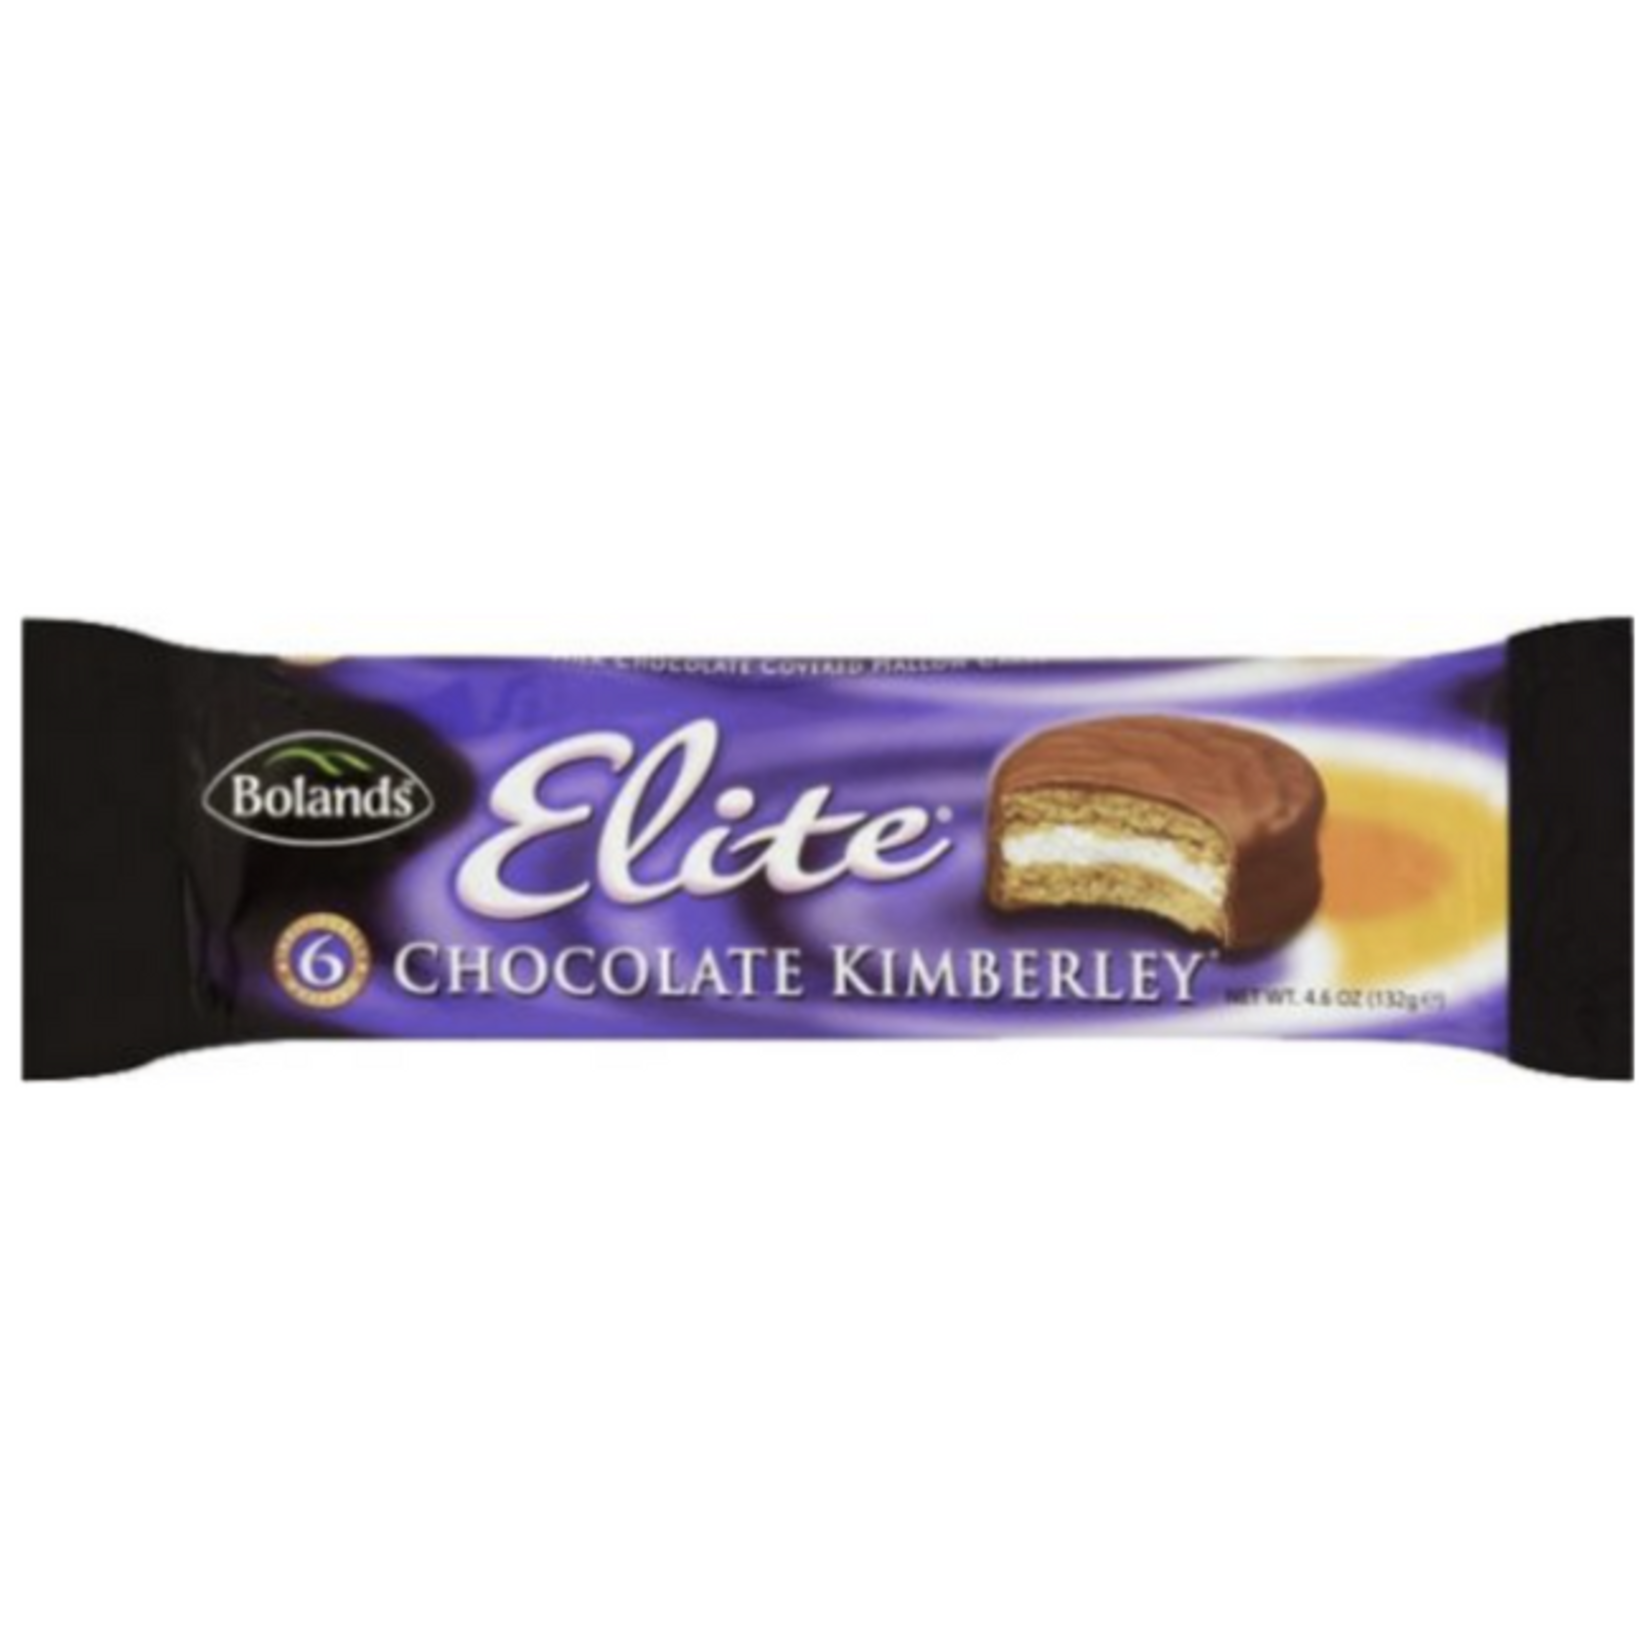 Bolands Bolands Elite Chocolate Kimberley Cookies 132g (4.7oz)